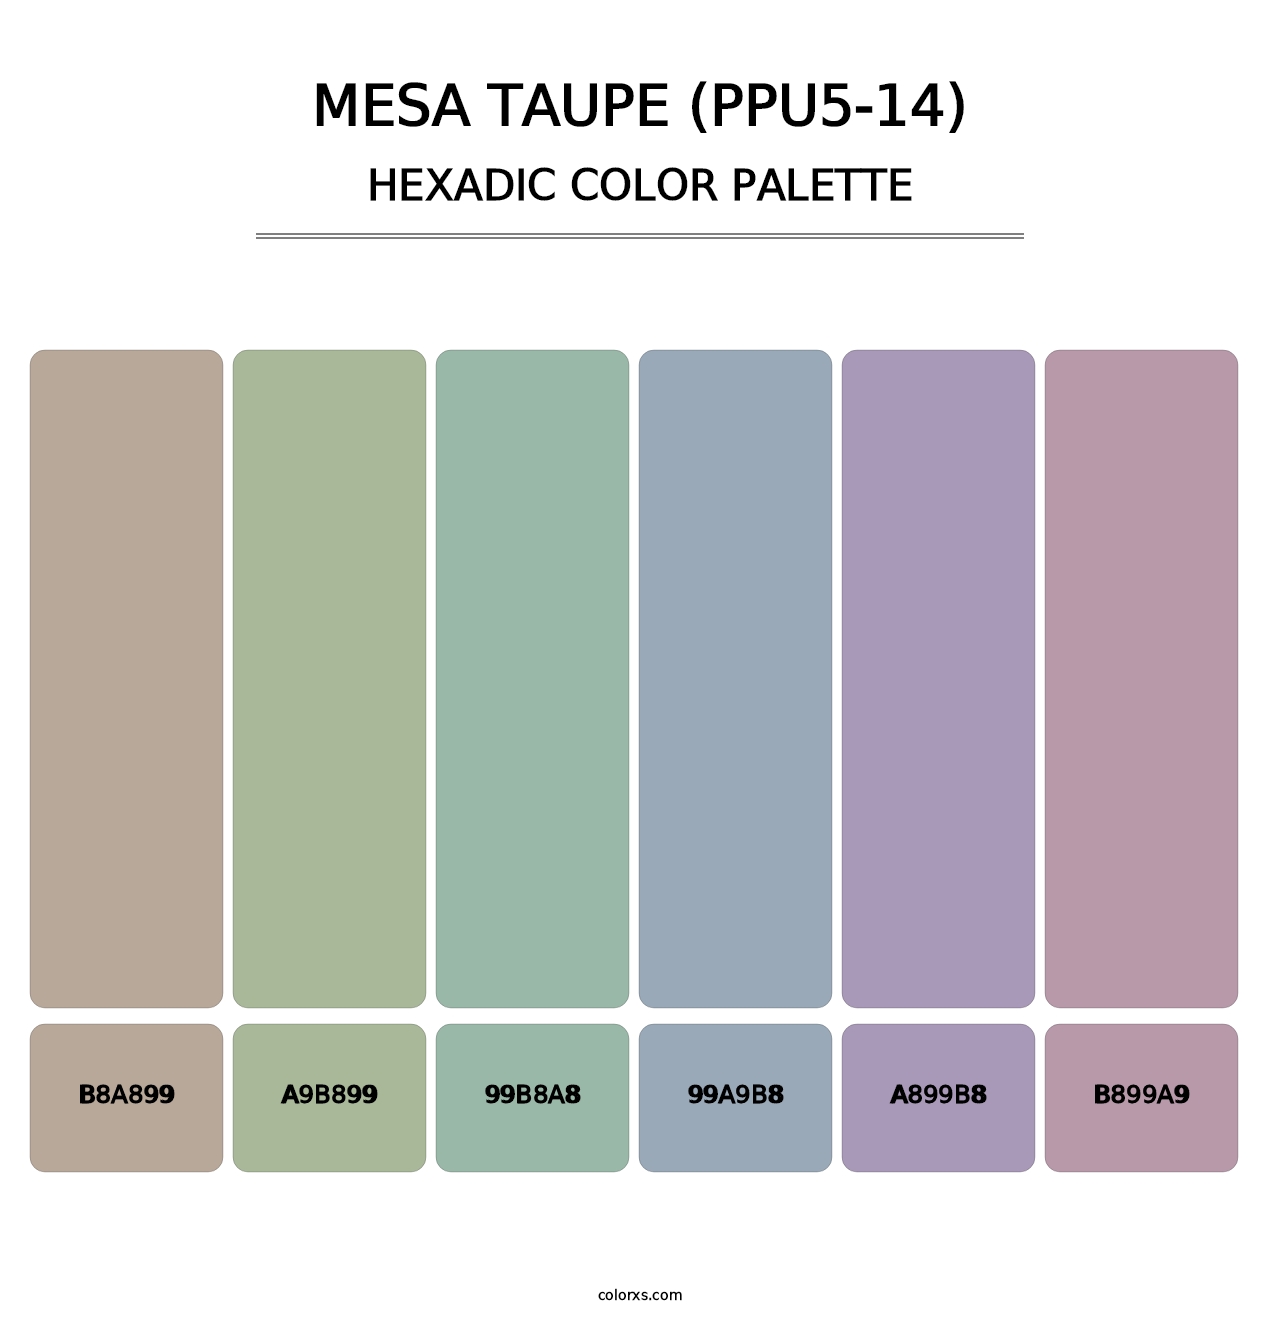 Mesa Taupe (PPU5-14) - Hexadic Color Palette